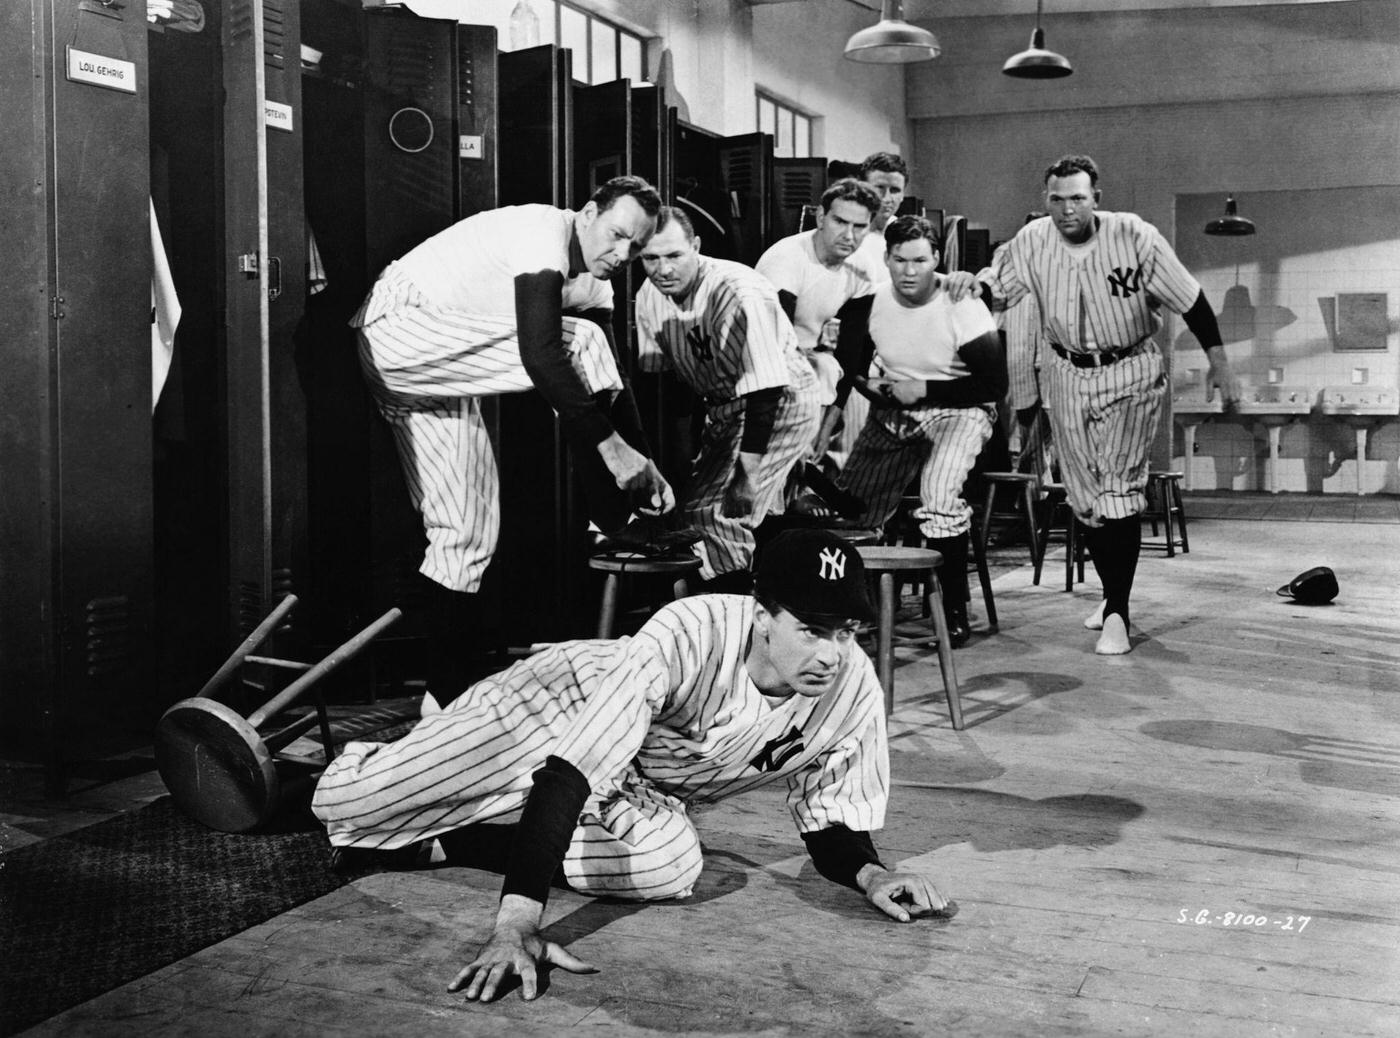 Gary Cooper portrays Lou Gehrig collapsing in the locker room in the 1942 movie Pride of the Yankees.